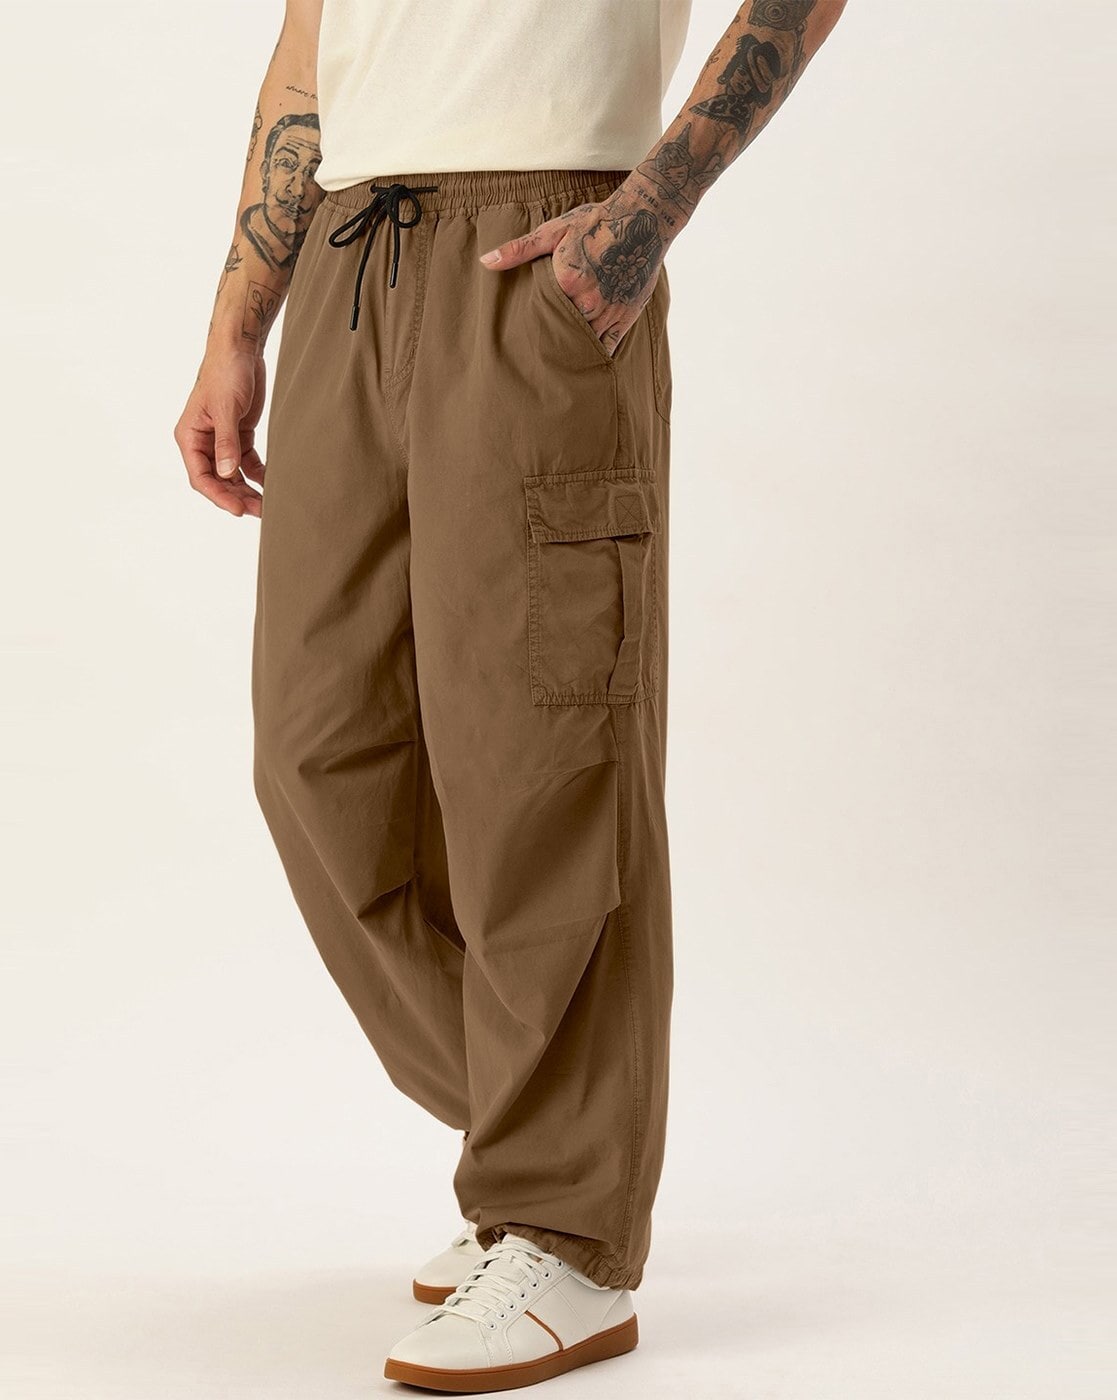 Spencer Project Surplus Ripstop Cargo Pants Umber - Umber Brown | SurfStitch